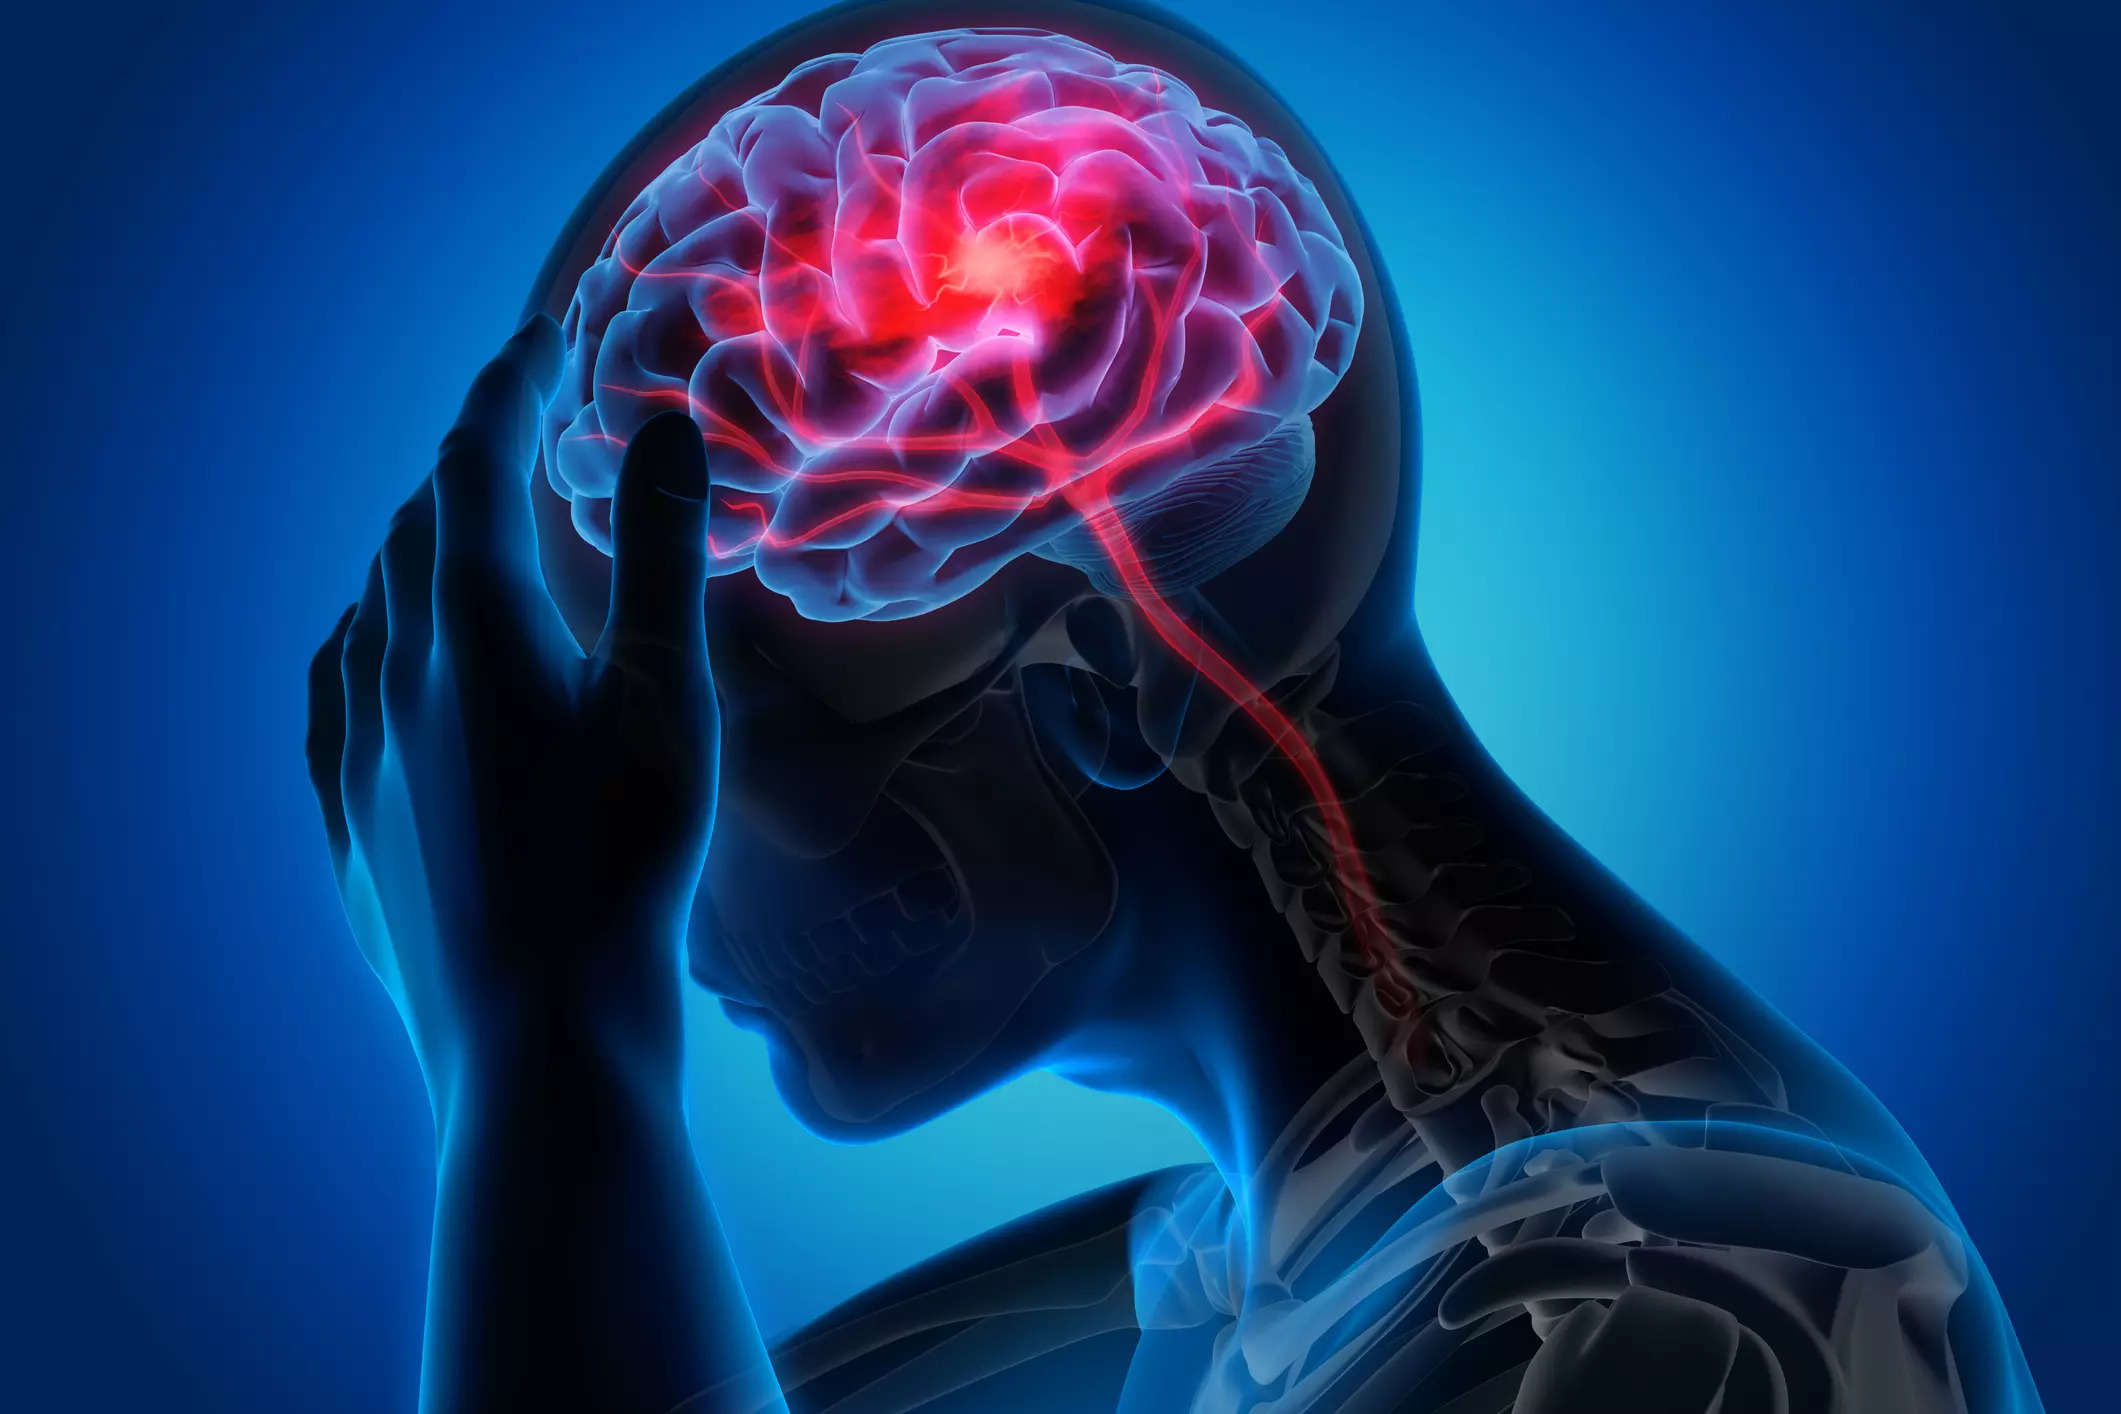 Epilepsy is a neurological condition where the brain emits sudden bursts of electrical signals in a short amount of time, resulting in seizures, fits and sometimes even death.